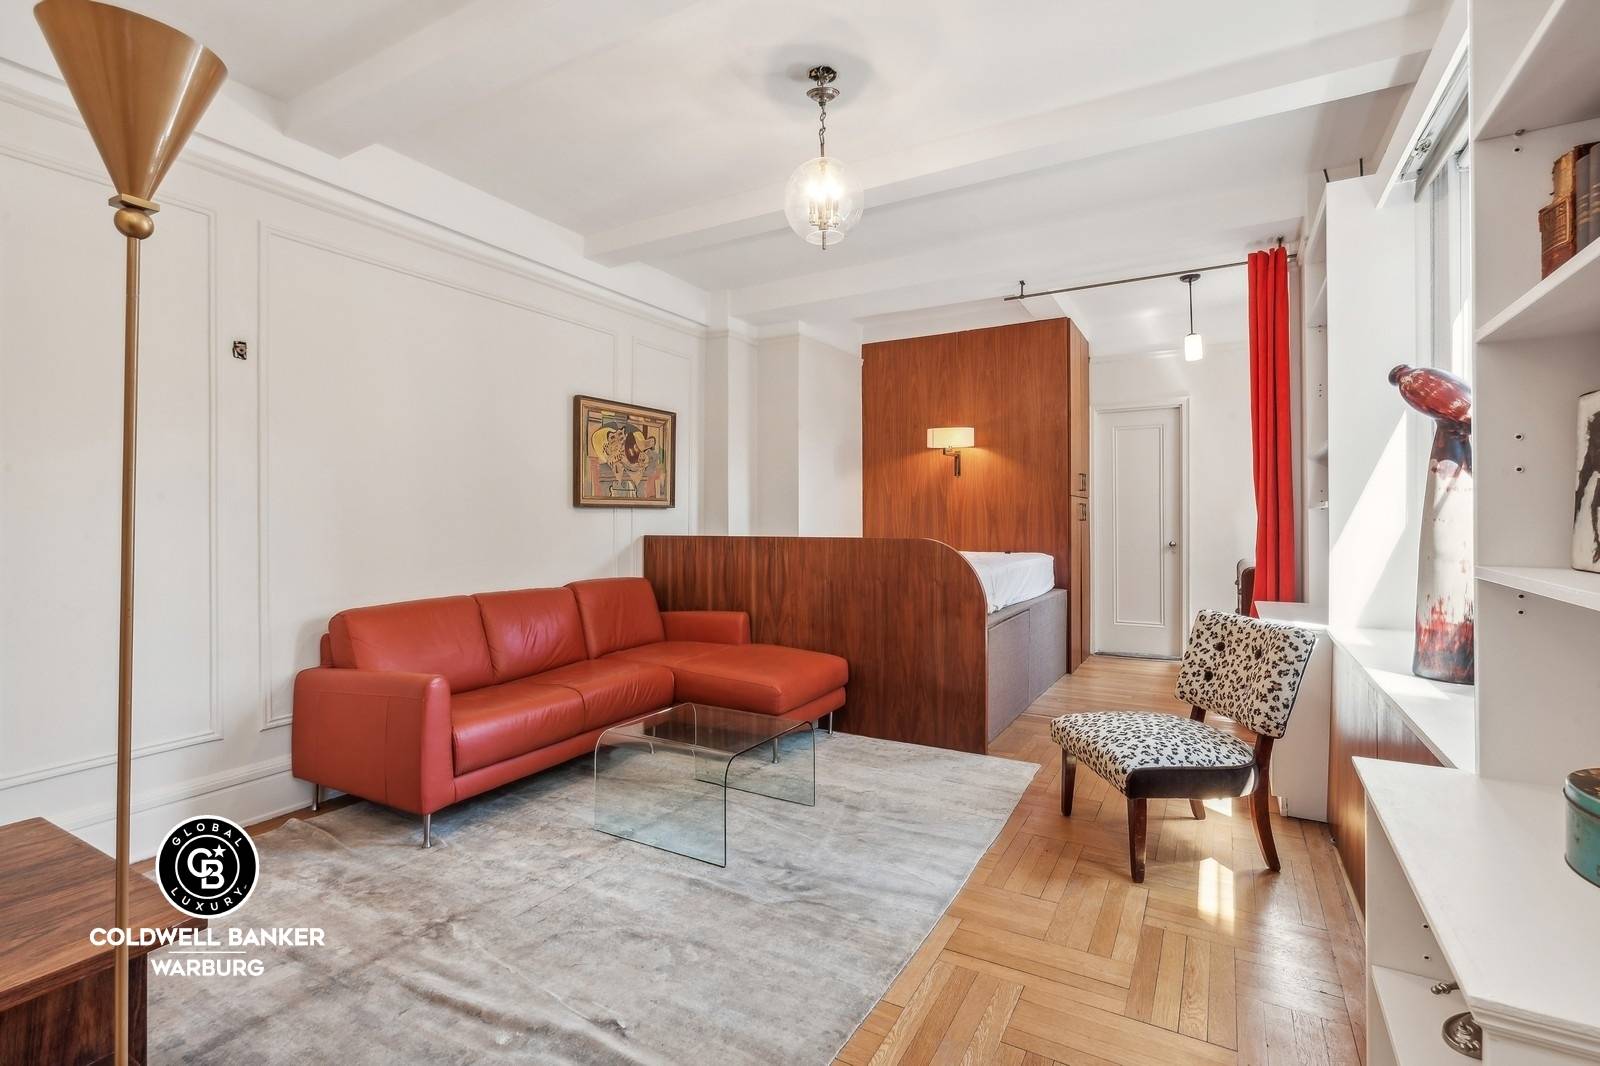 This home is a harmonious blend of classic charm, comfort and location, the heart of the Upper West Side.